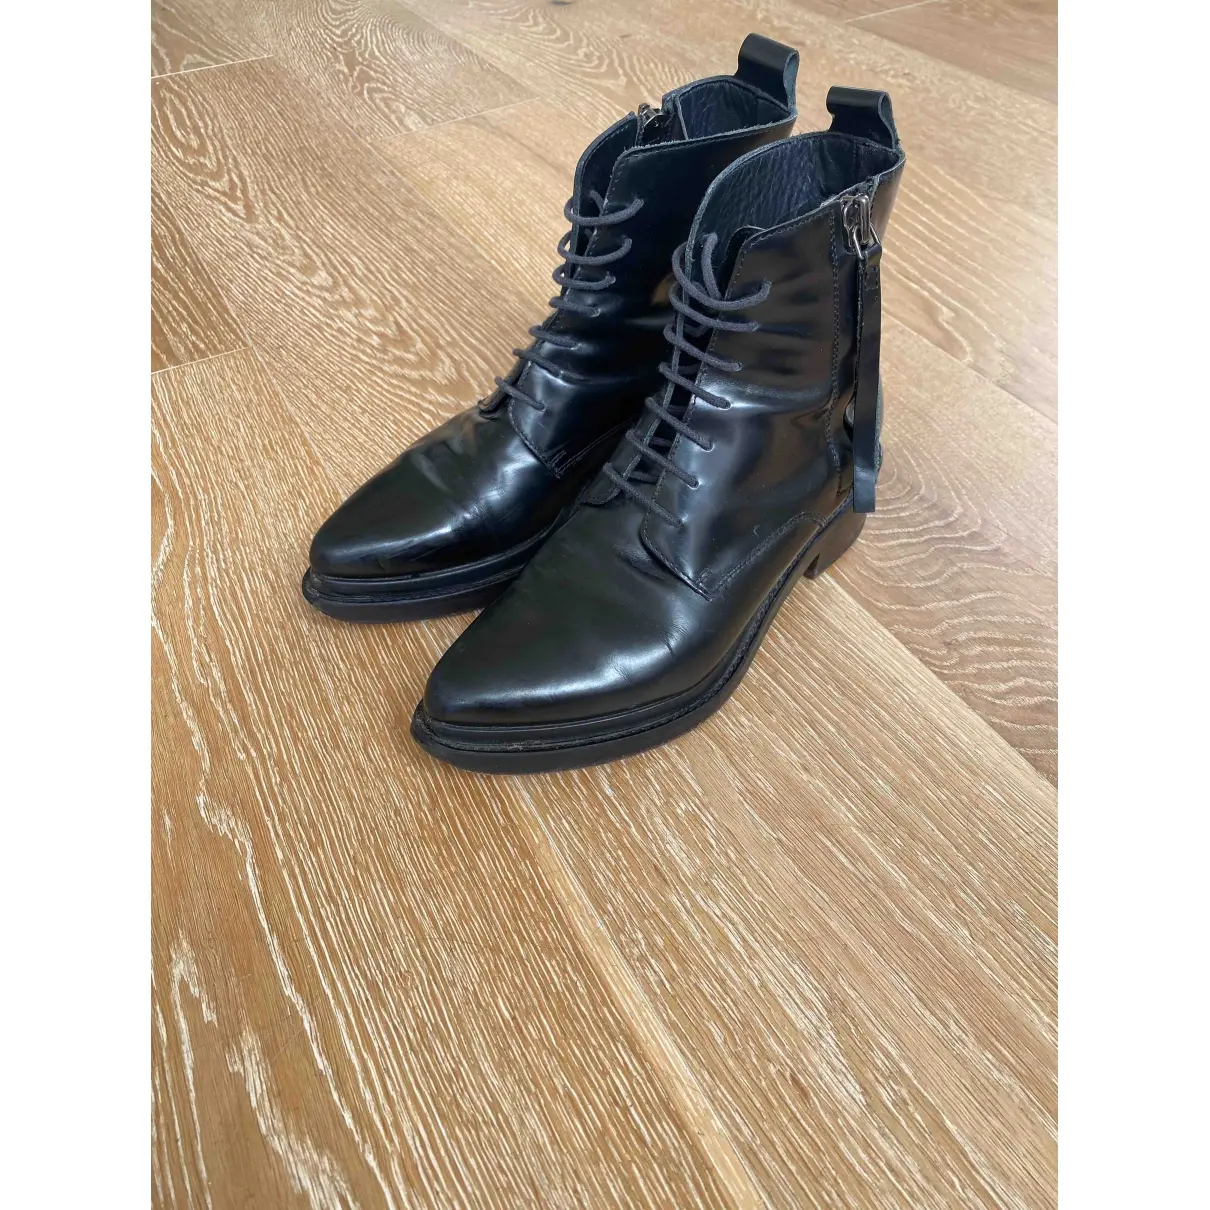 Acne Studios Patent leather ankle boots for sale